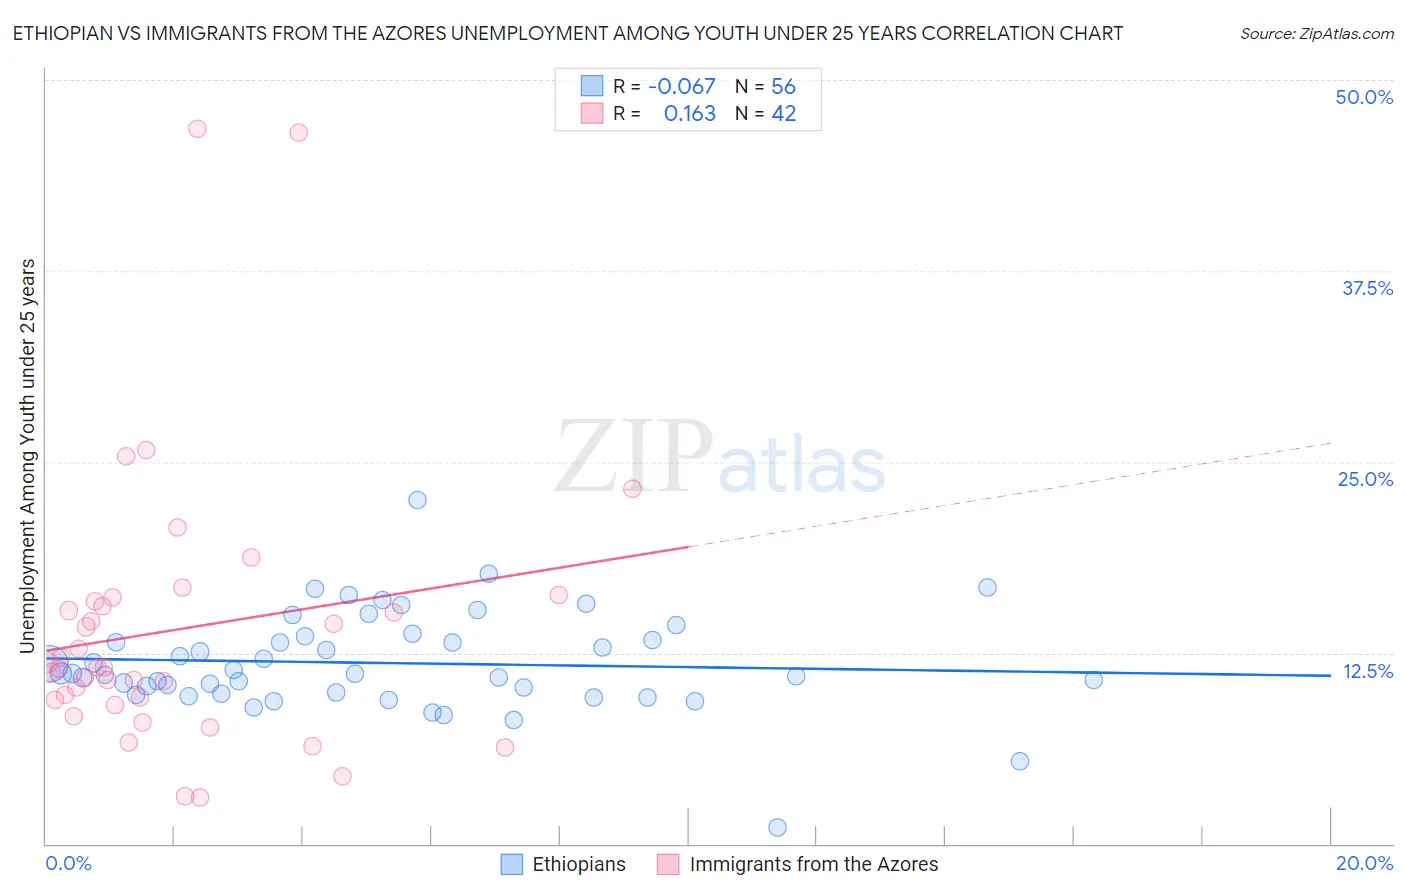 Ethiopian vs Immigrants from the Azores Unemployment Among Youth under 25 years